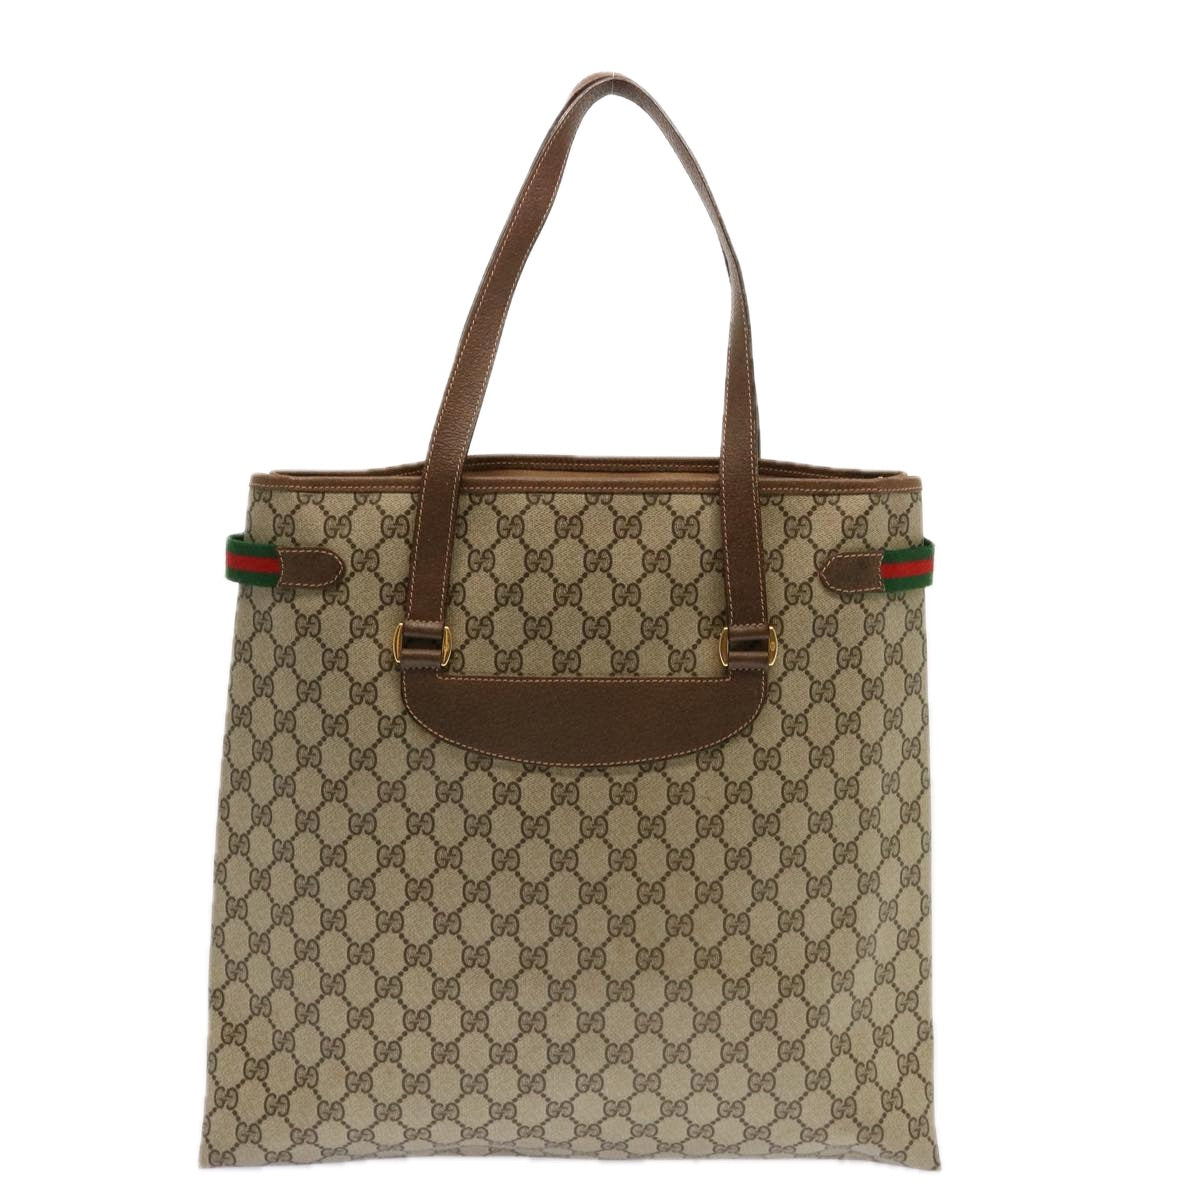 GUCCI GG Supreme Web Sherry Line Tote Bag PVC Beige Red 39 02 091 Auth ep3766